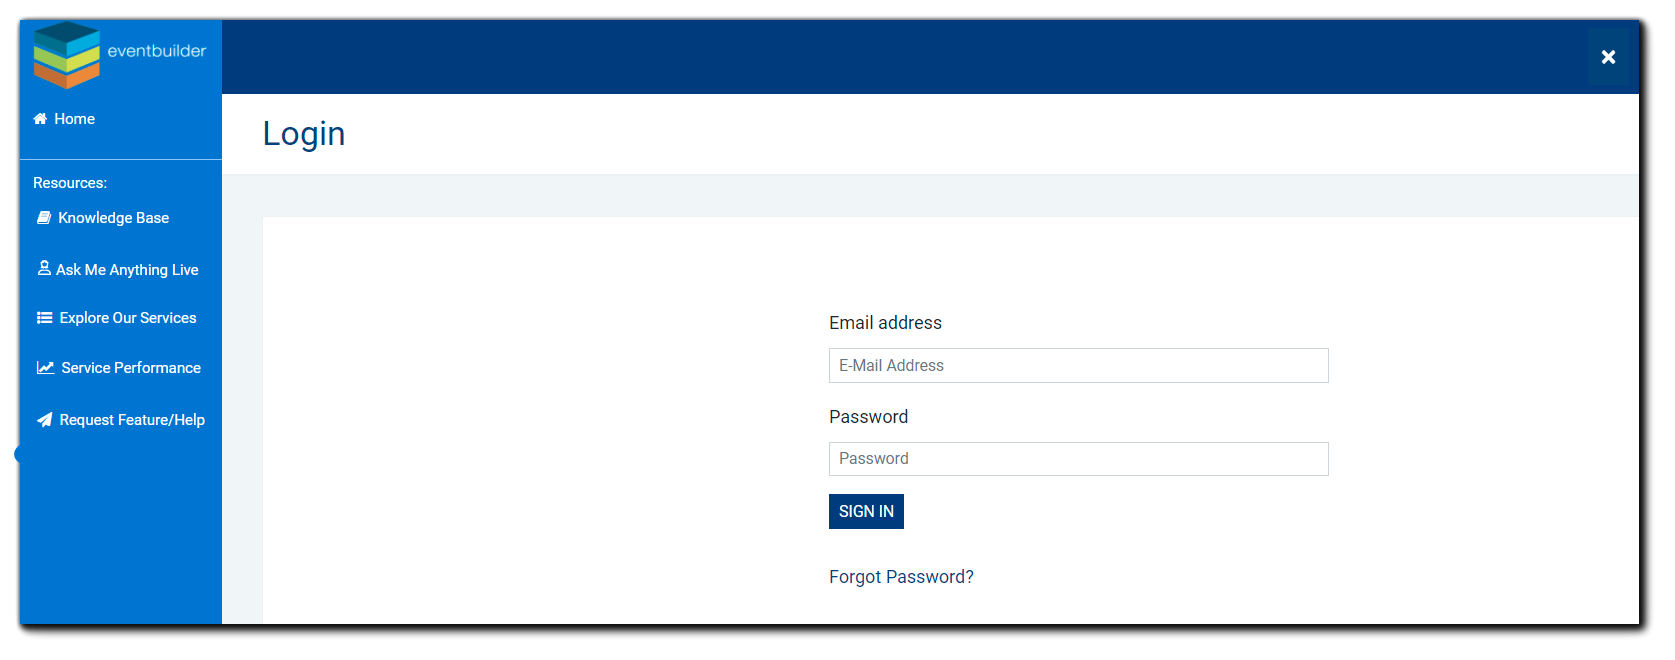 Screenshot: EventBuilder main login screen - email address and password fields, blue sign in button, and forgot password link. Left navigation in blue, with Home and Resources, Knowledge Base, Ask Me Anything, Explore Our Services, Service Performance, and Request Feature/Help options.